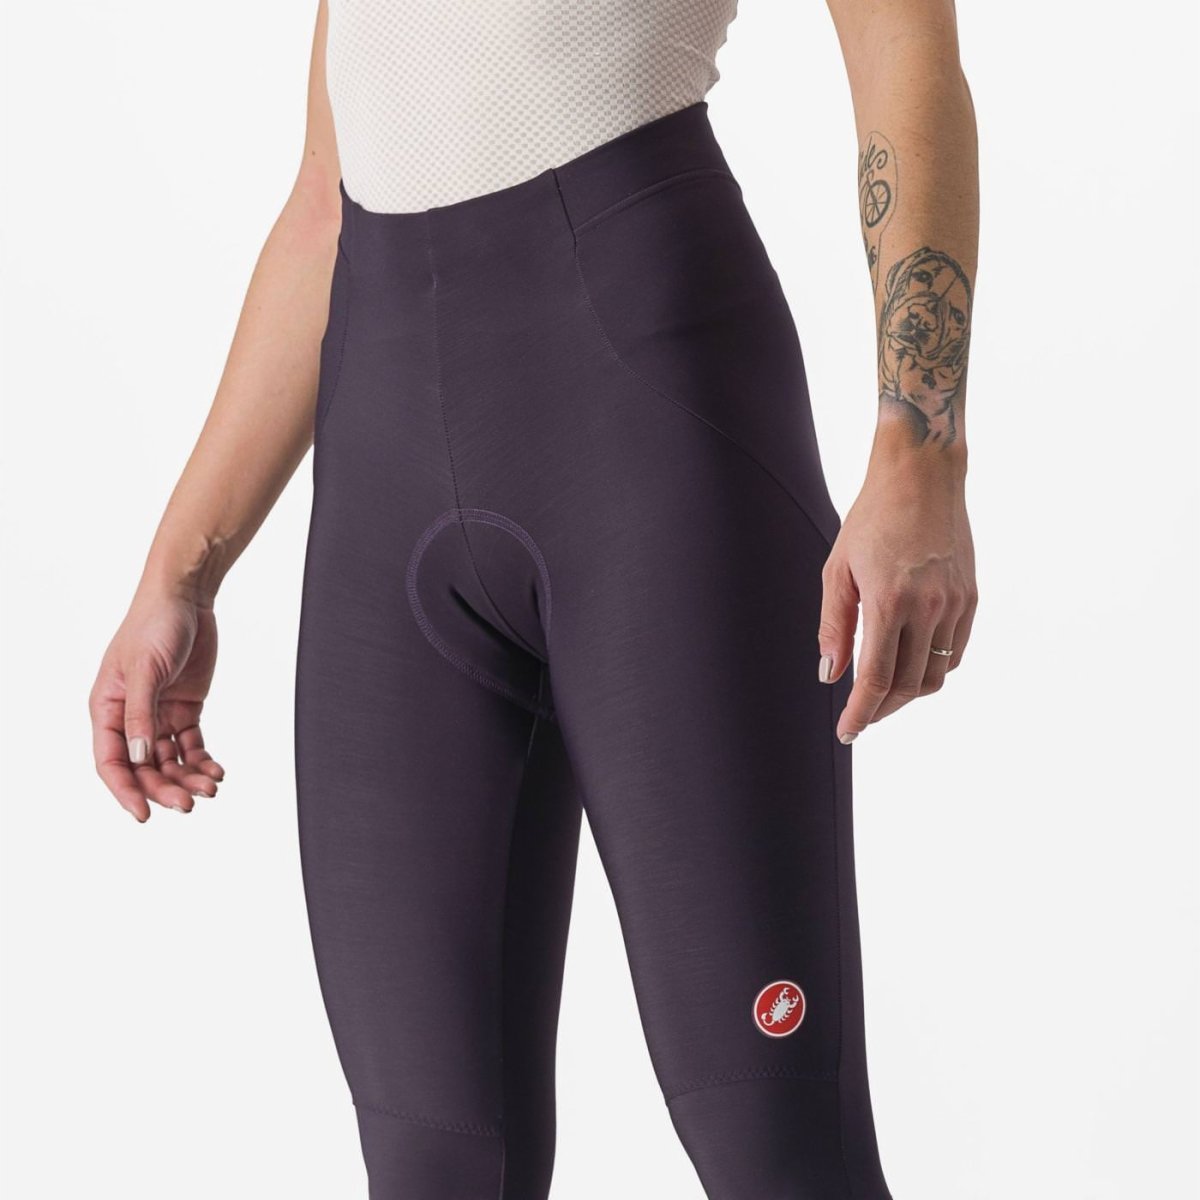 Bibtights & Knickers Cycling Woman SORPASSO RoS W TIGHT - Castelli Cycling